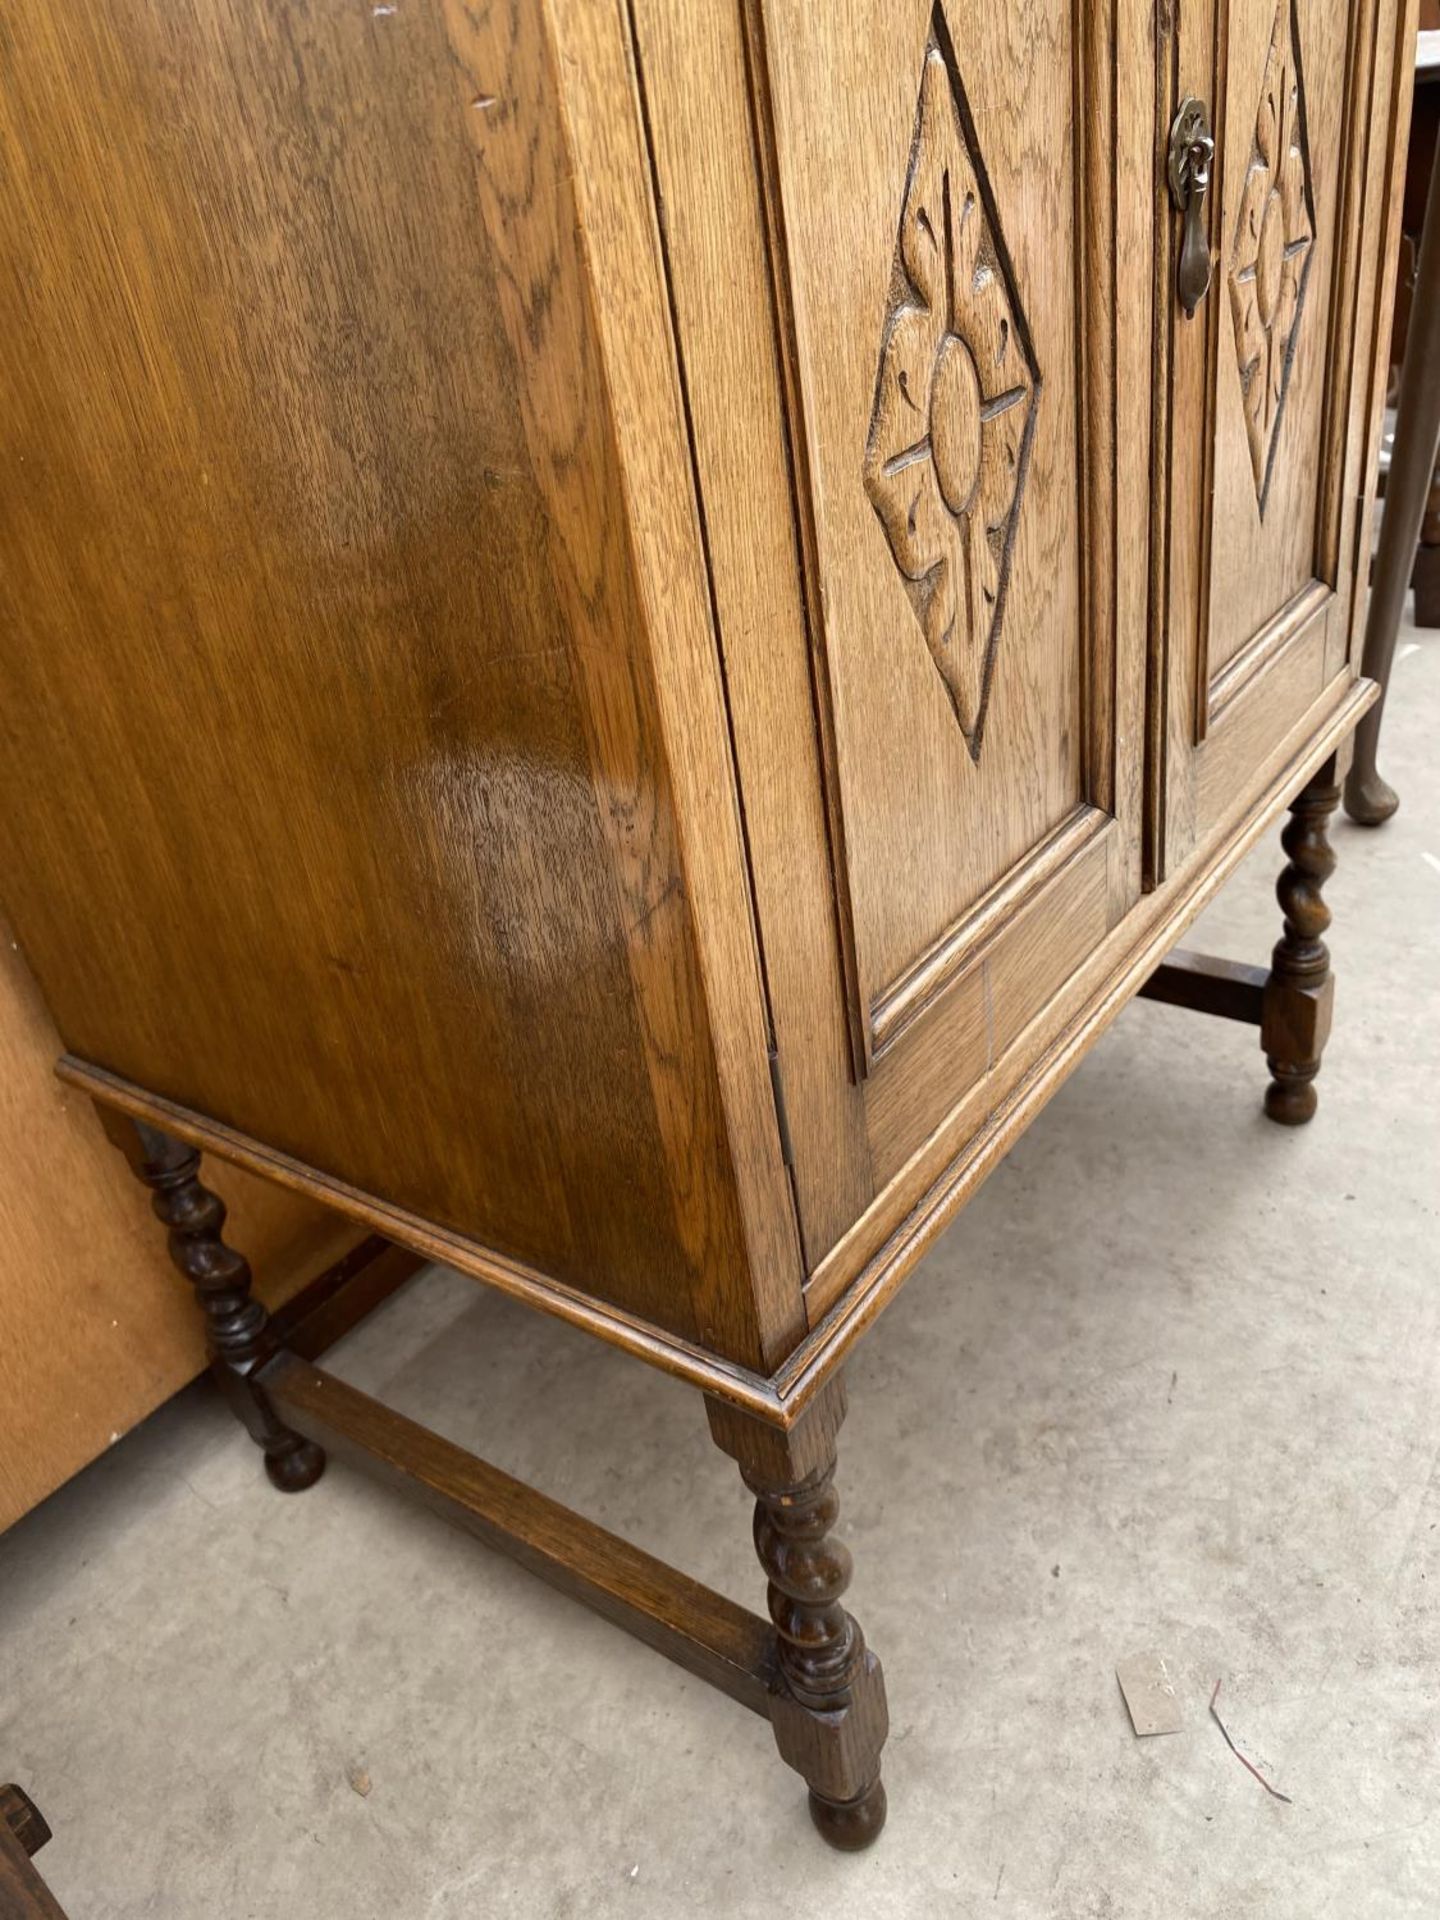 AN EARLY 20TH CENTURY TWO DOOR CABINET ON BARLEY TWIST LEGS - Image 3 of 5